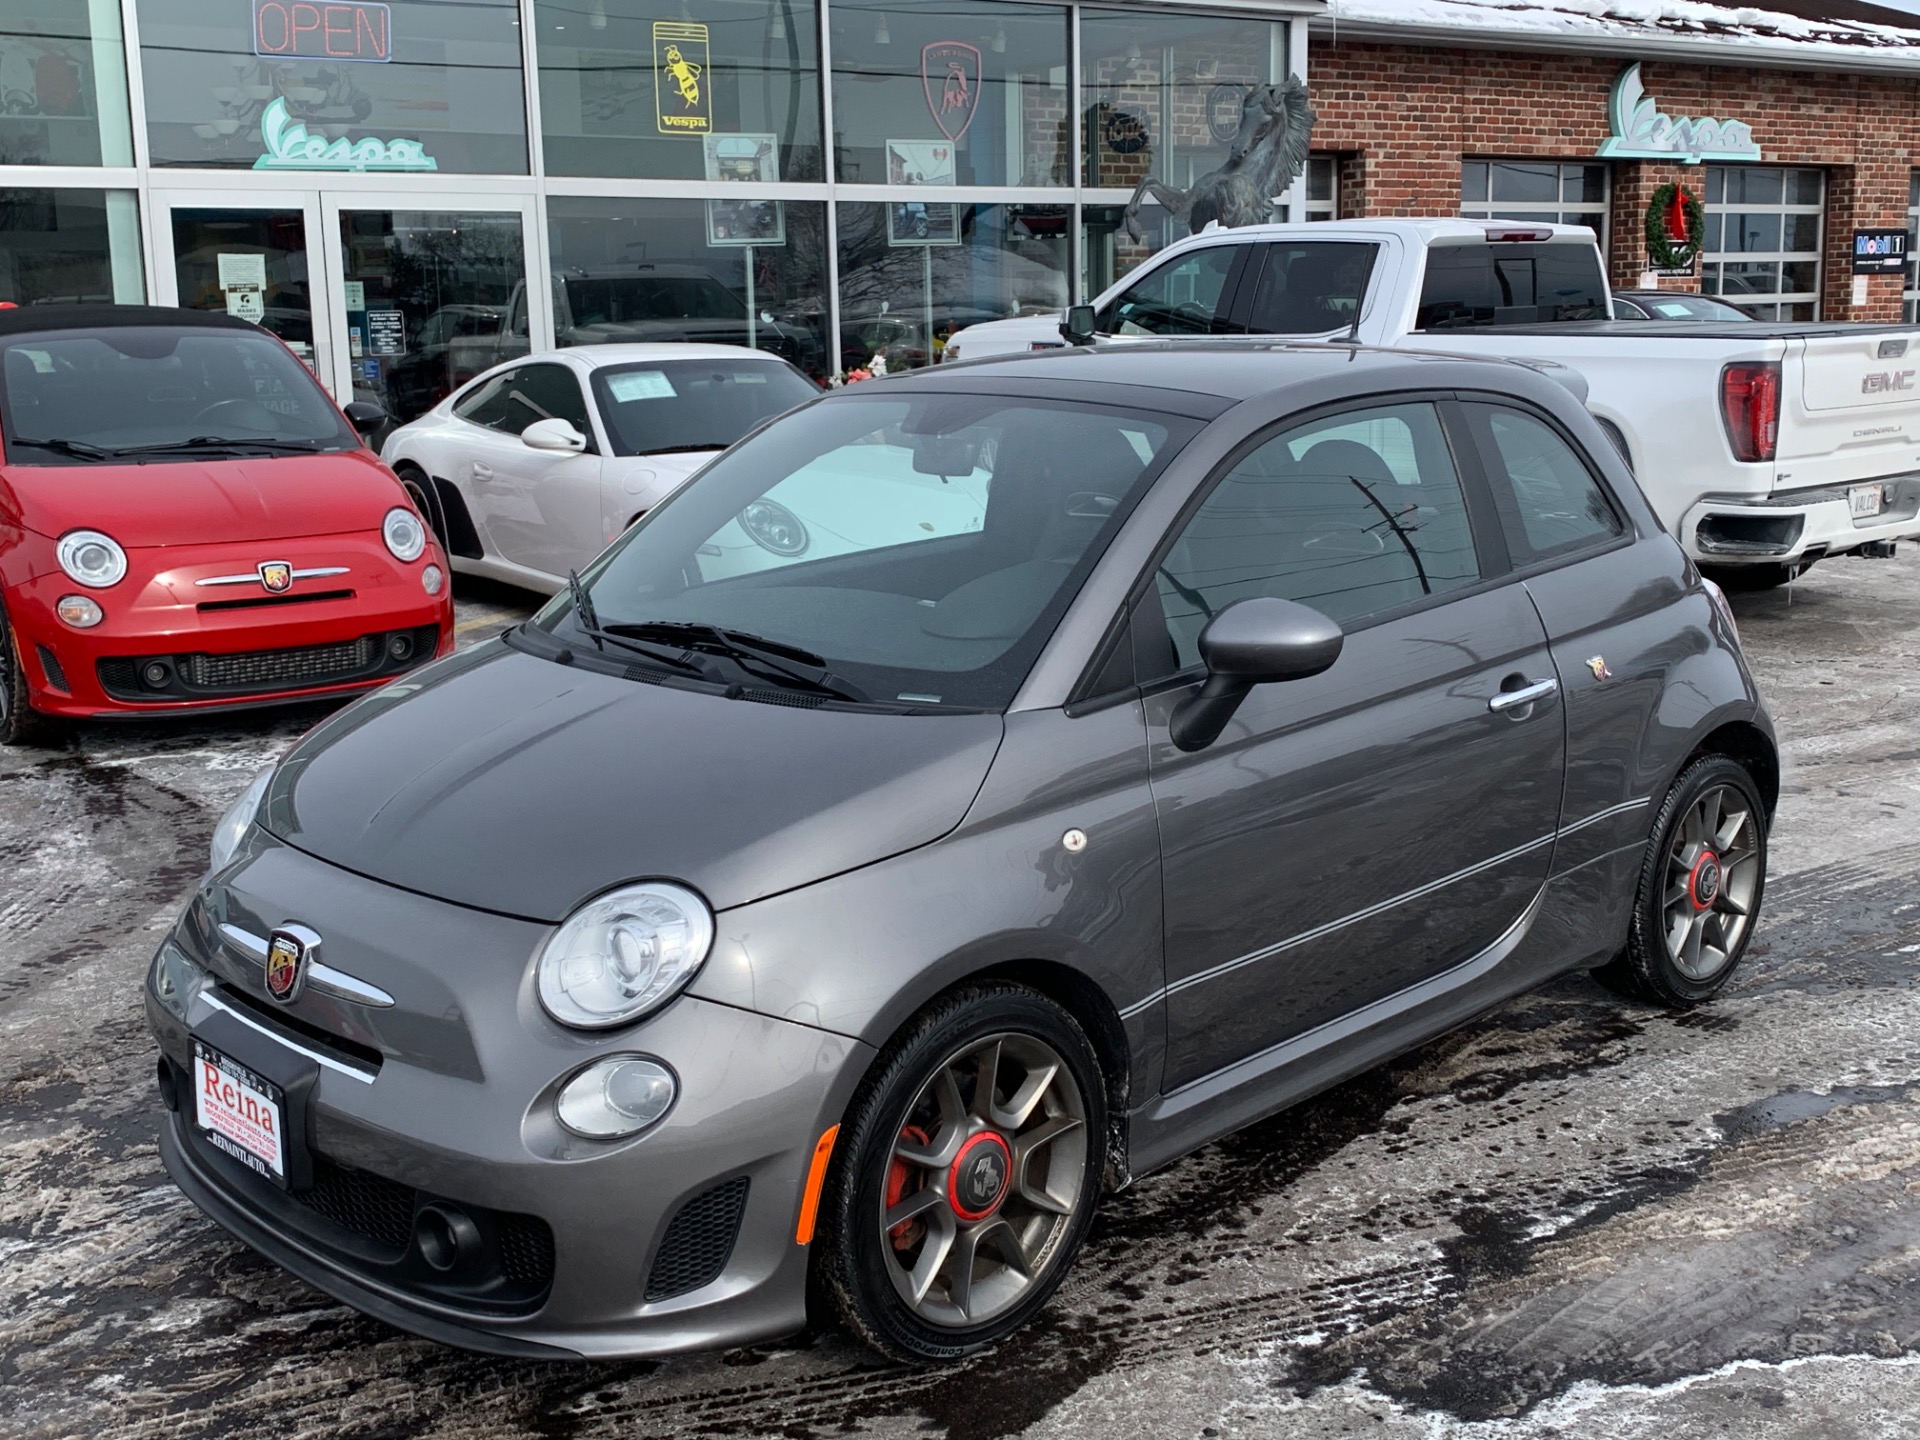 2013 FIAT 500 Abarth Stock 1643 for sale near Brookfield